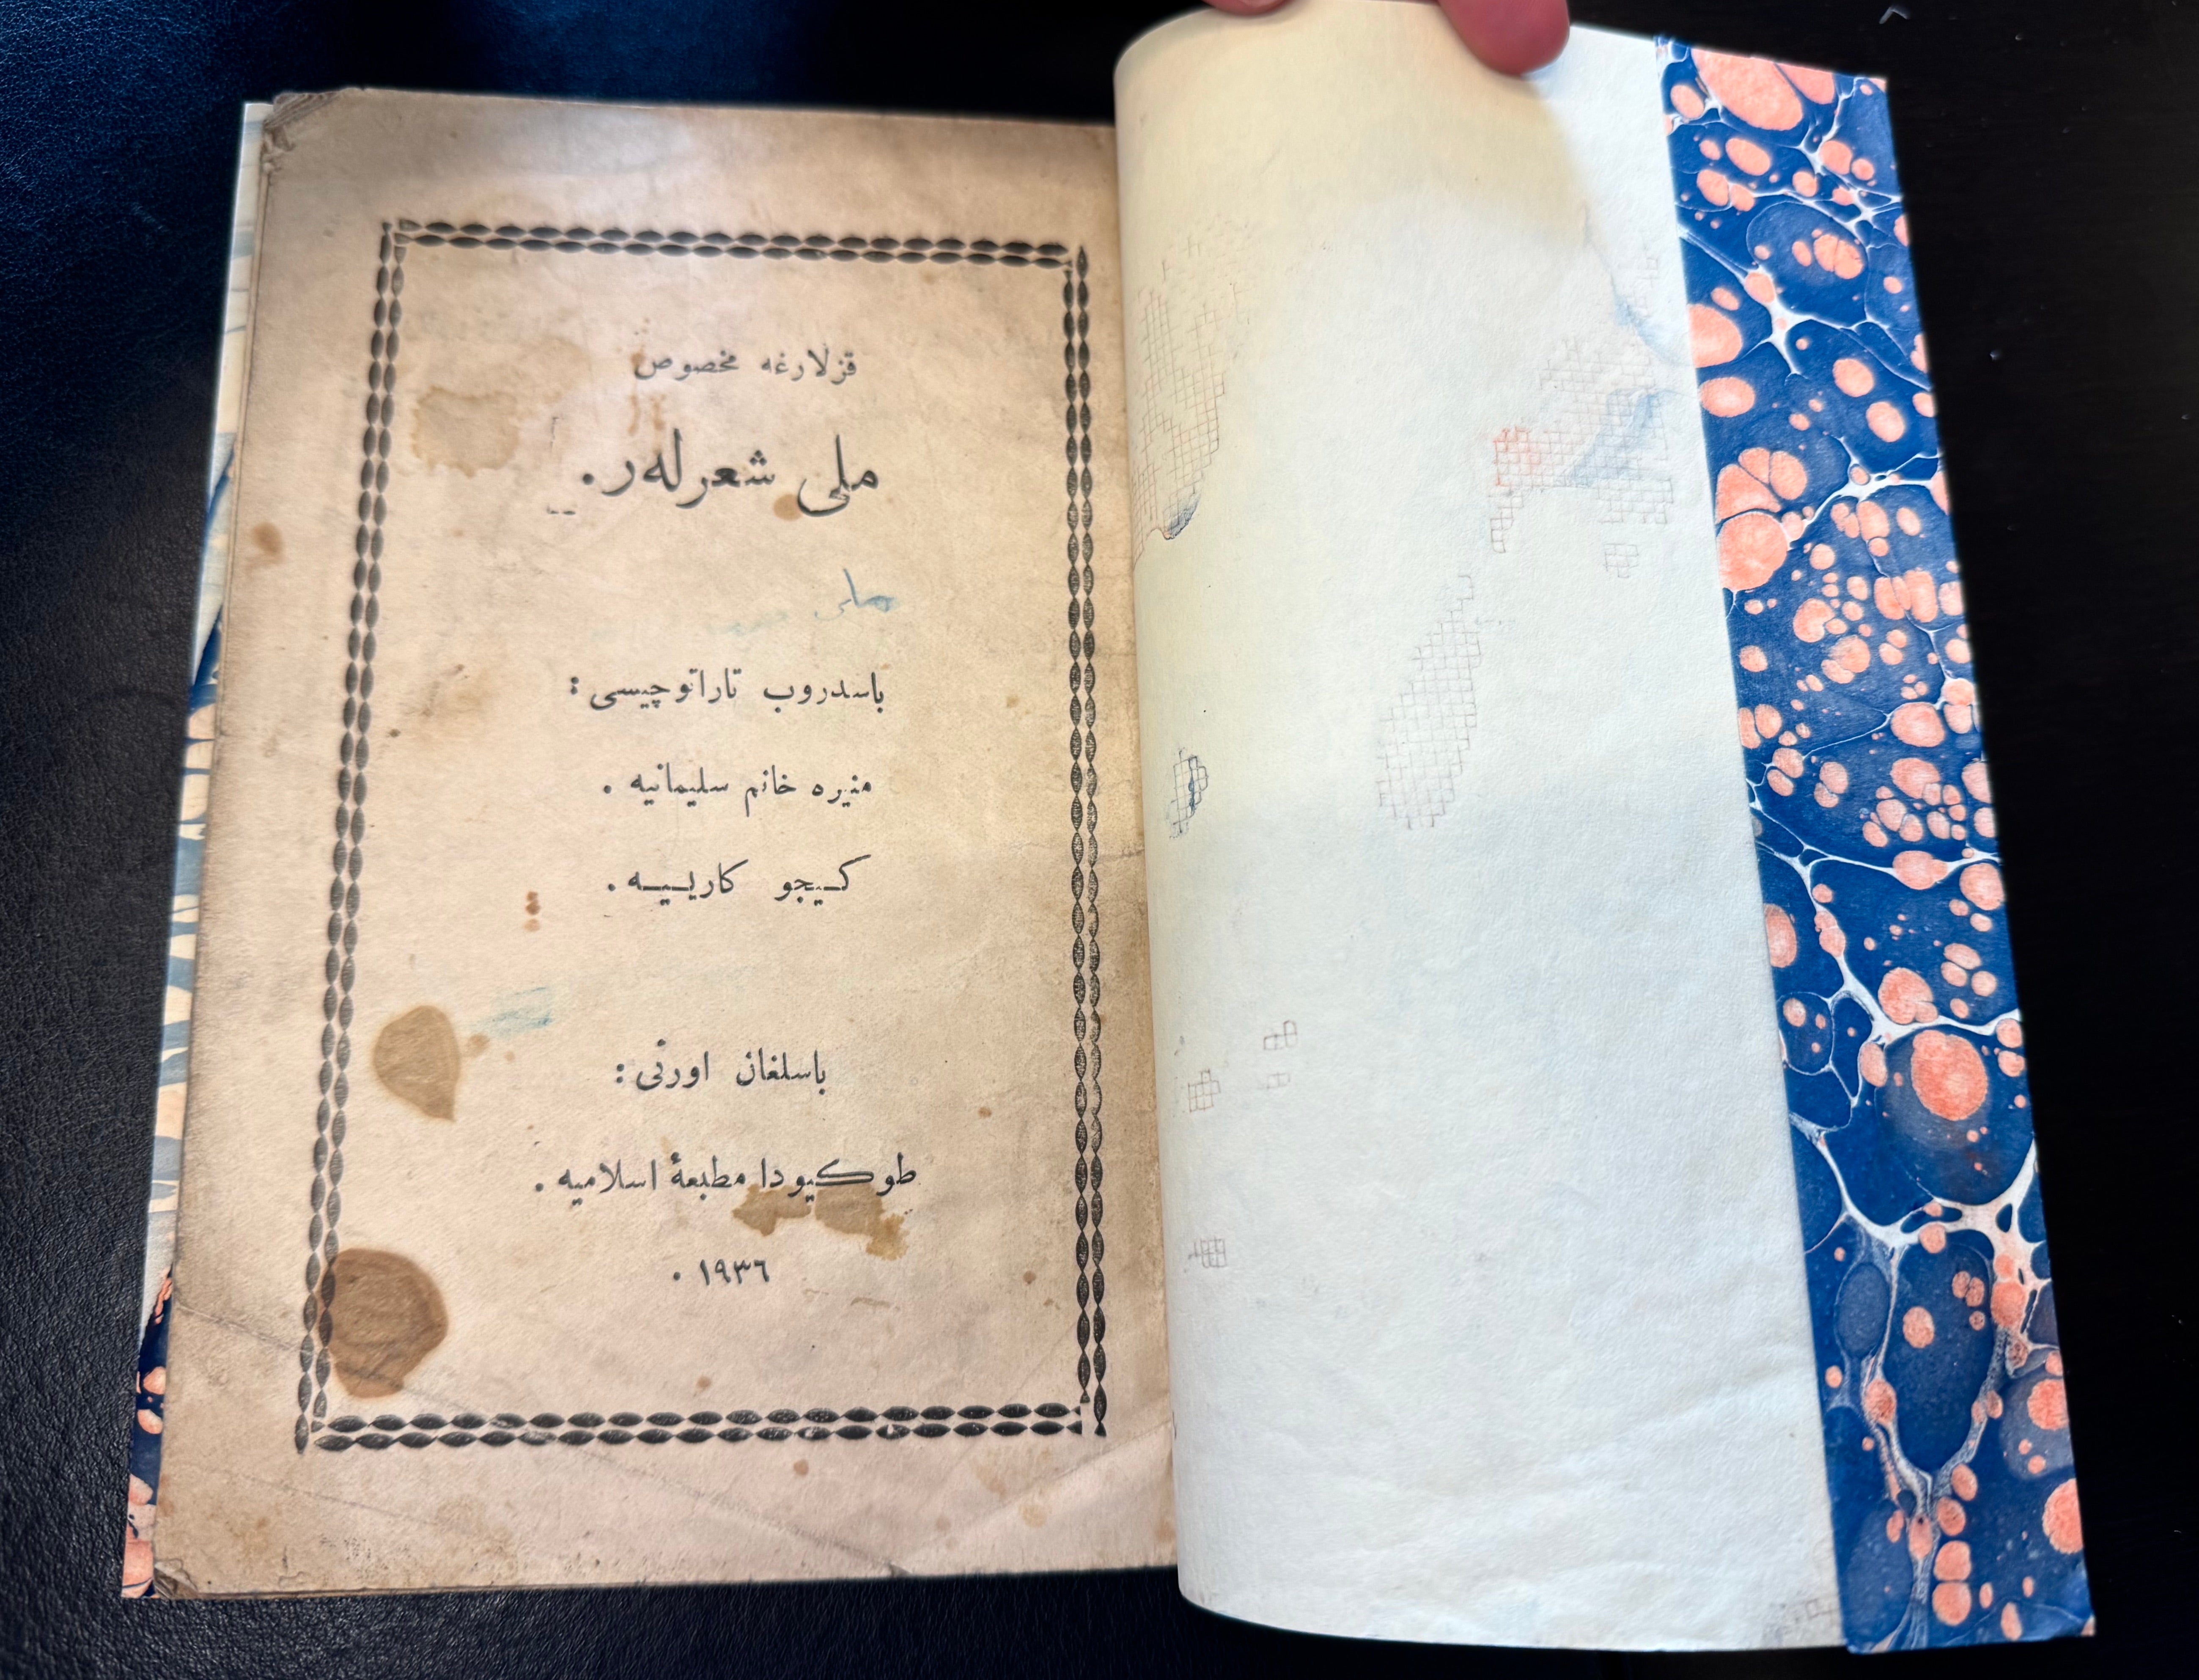 A hand is shown turning the page of an old book with Arabic script. The visible page has Arabic text surroundeid by a decorative border, and there are some stains on the page indicating its age. The paper appears aged and slightly yellowed.